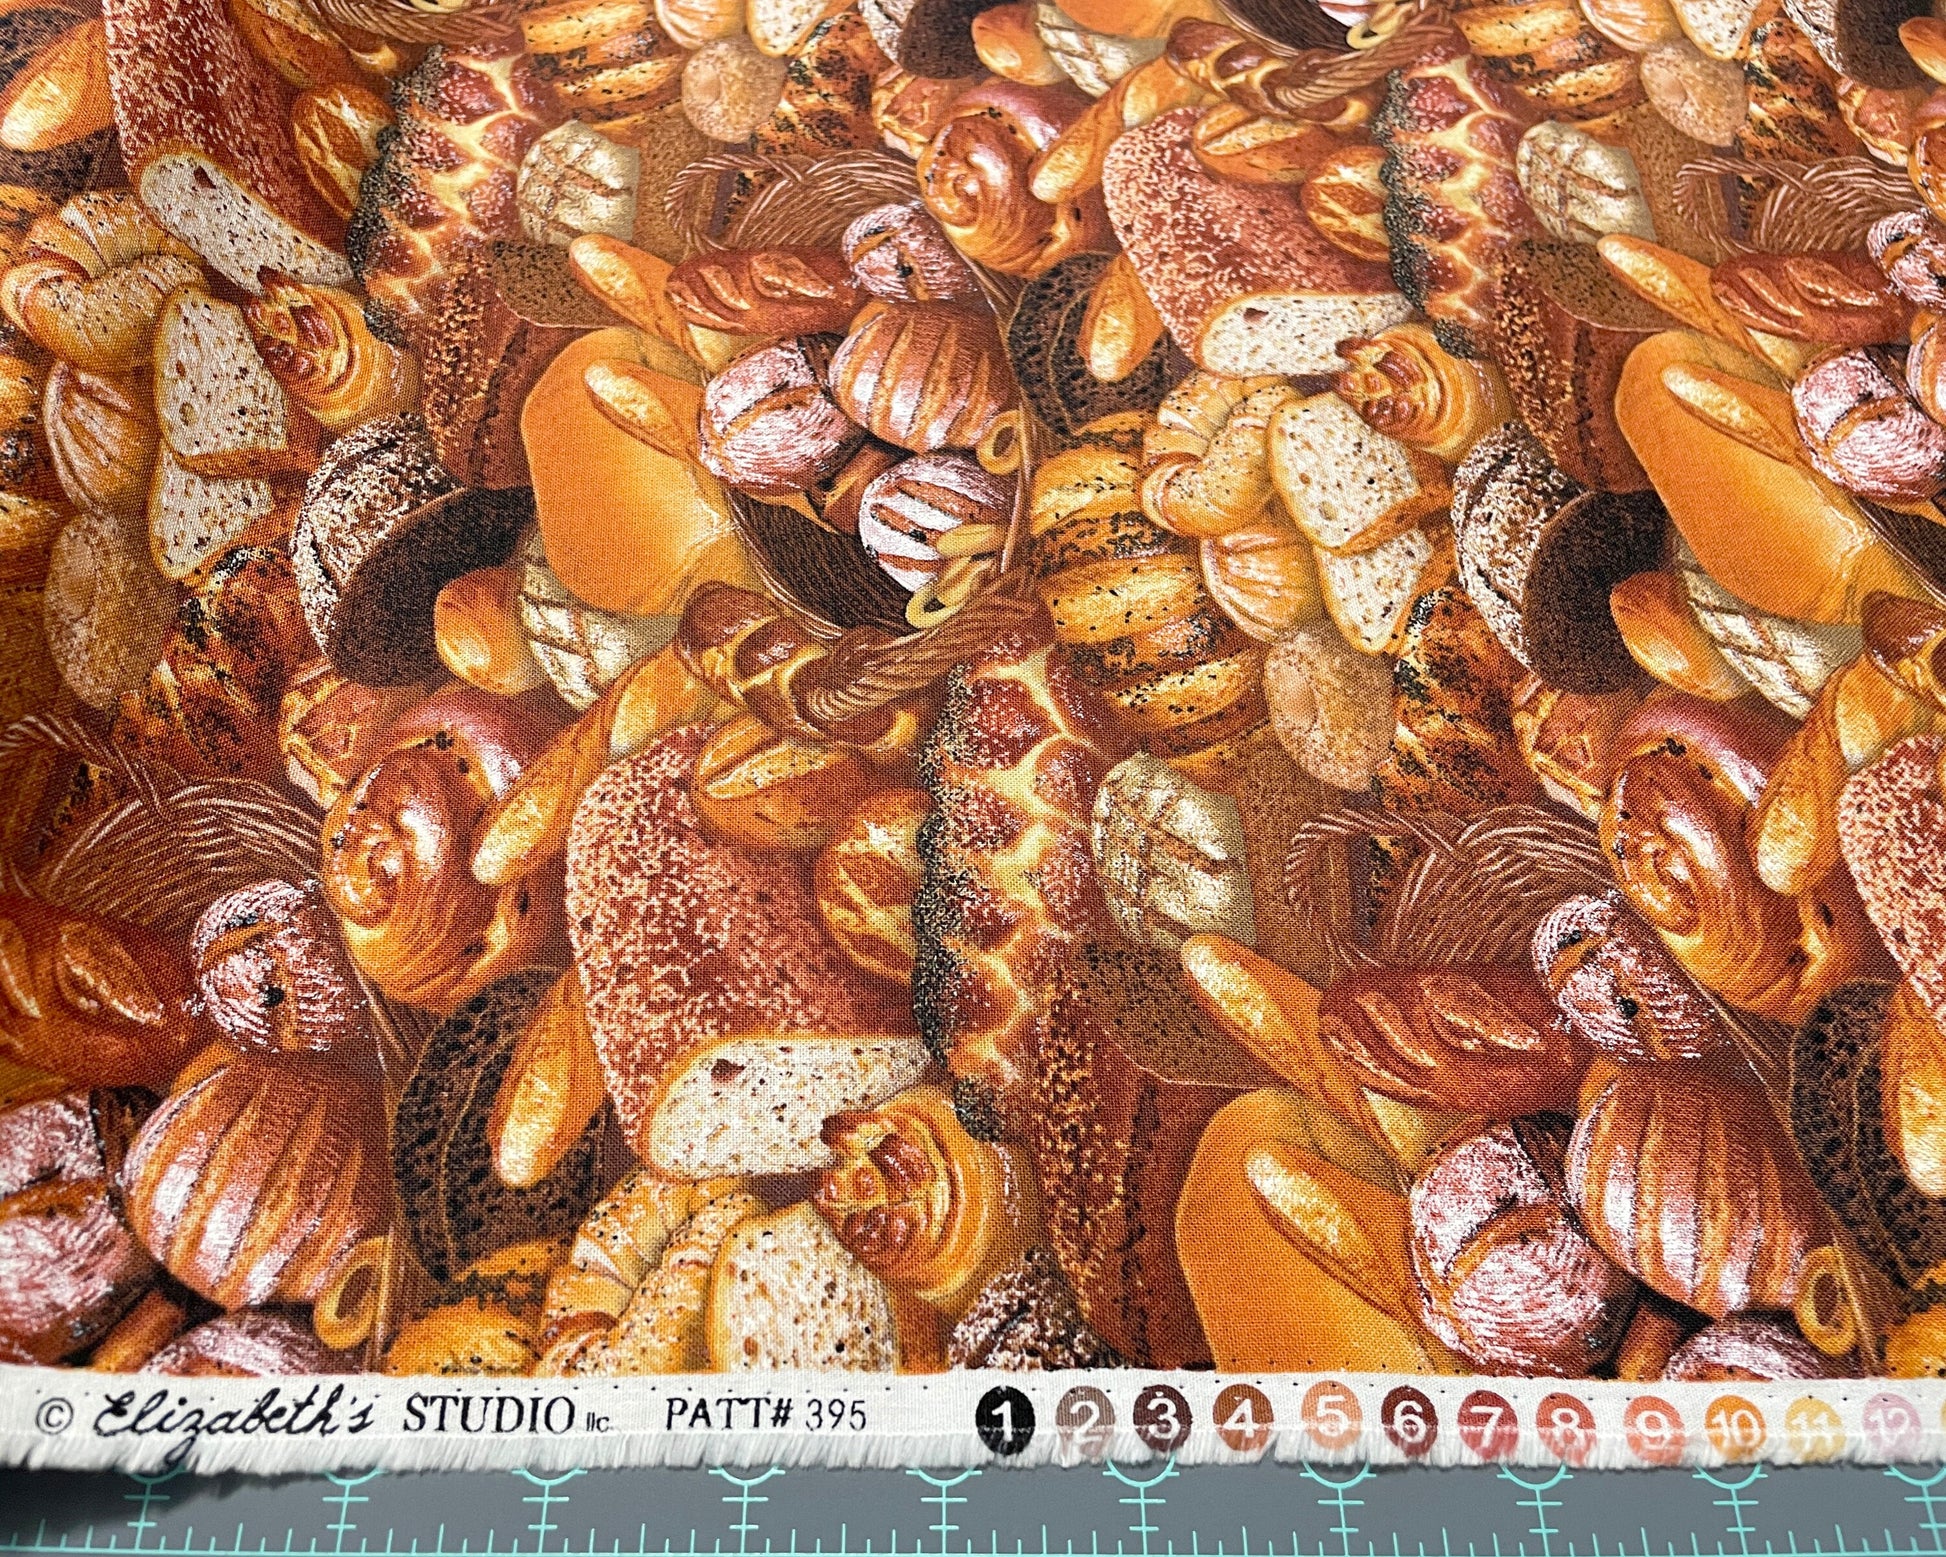 Bread Fabric - Food Festival collection by Elizabeth Studios - 100% Cotton Fabric - Food theme Baking Bread Loaf Kitchen - Ships NEXT DAY